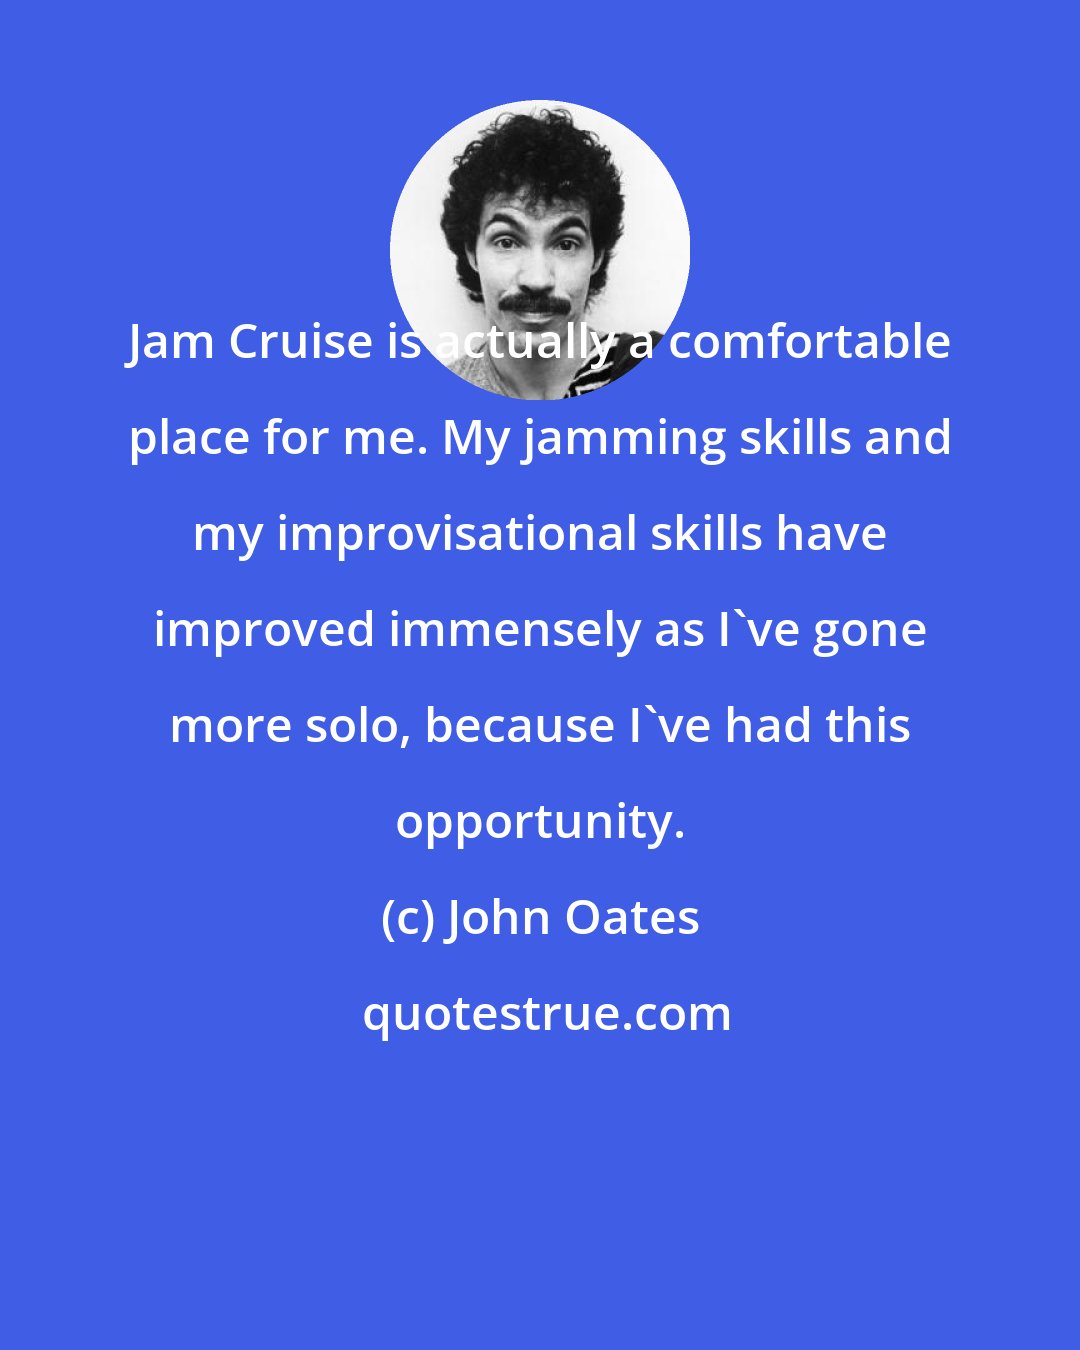 John Oates: Jam Cruise is actually a comfortable place for me. My jamming skills and my improvisational skills have improved immensely as I've gone more solo, because I've had this opportunity.